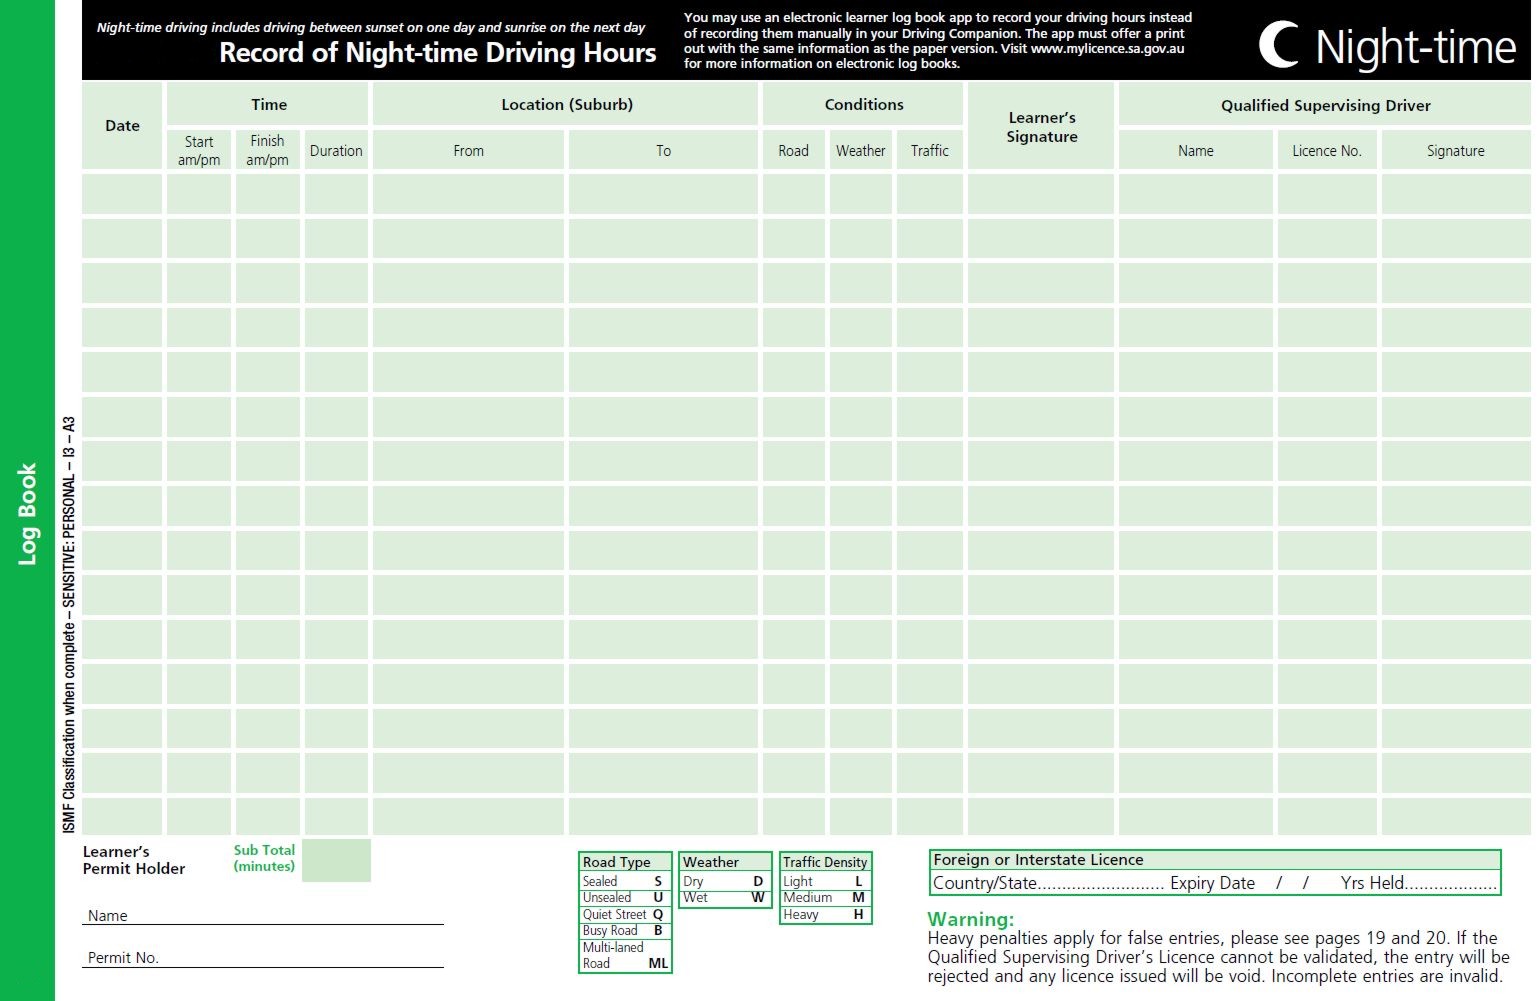 Sample of a night driving hours log book form